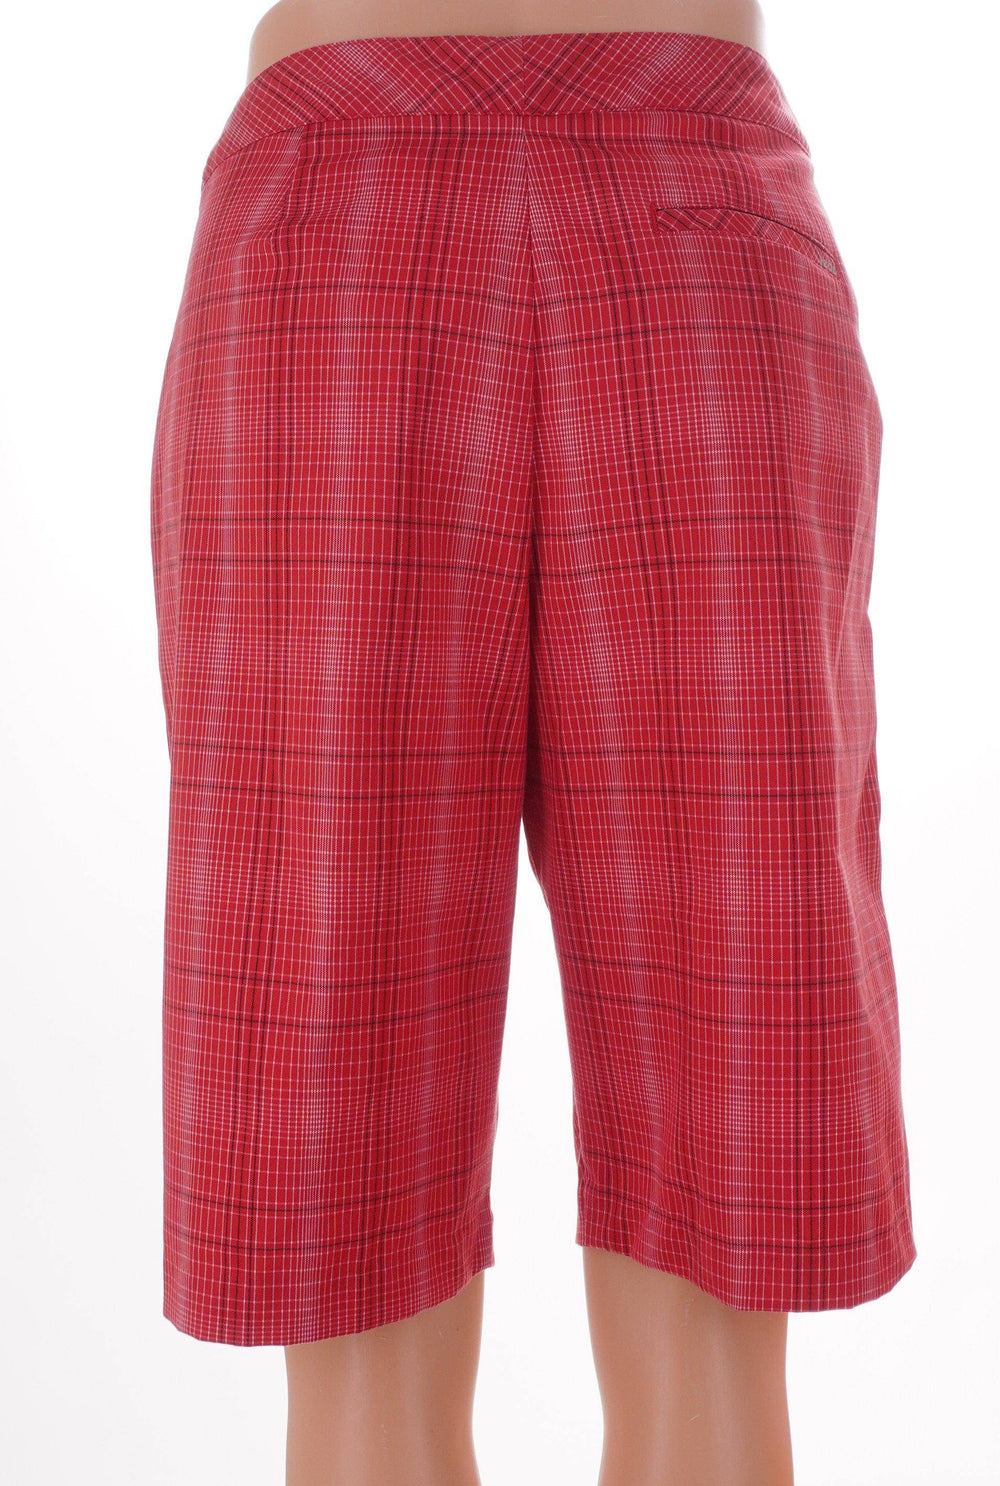 Izod Red / 4 / Consigned Izod Short - Red Plaid - Size 4